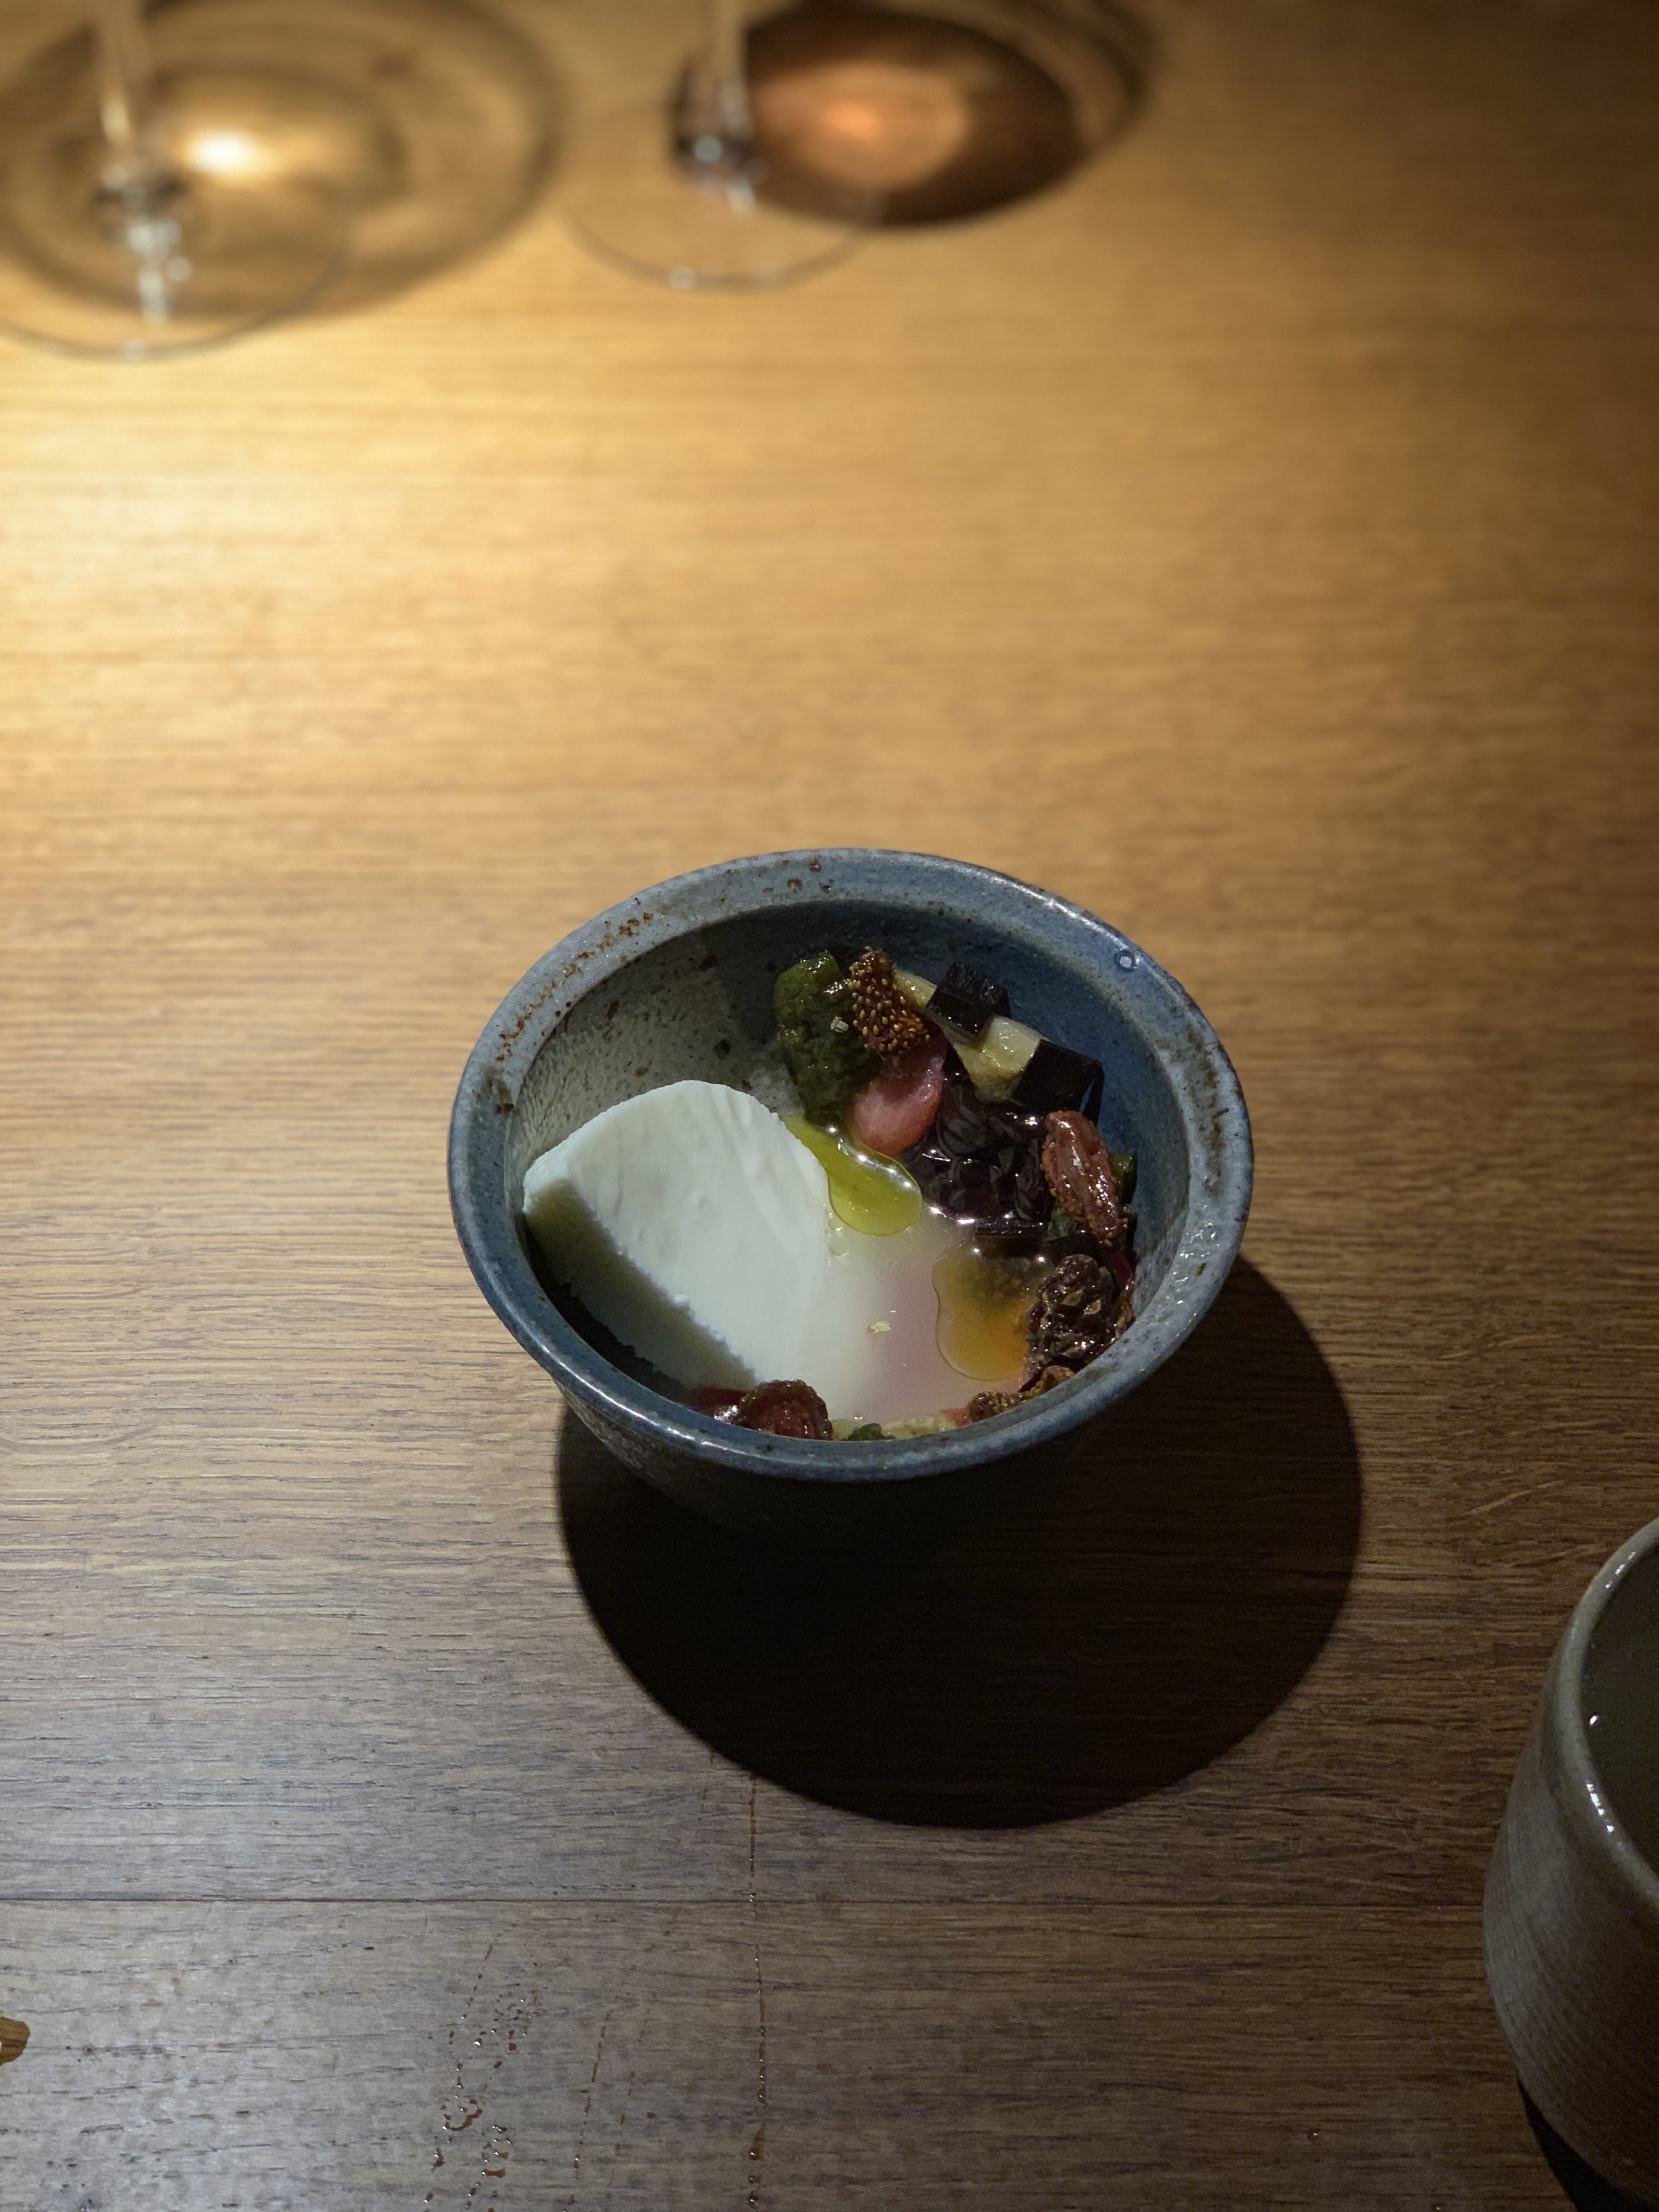  For dessert: A mousse with sheep’s milk yogurt with salted berries from the previous summer, pickled pine cones, and seaweed marinated in Arronia berry. Everything was in a white currant broth. 